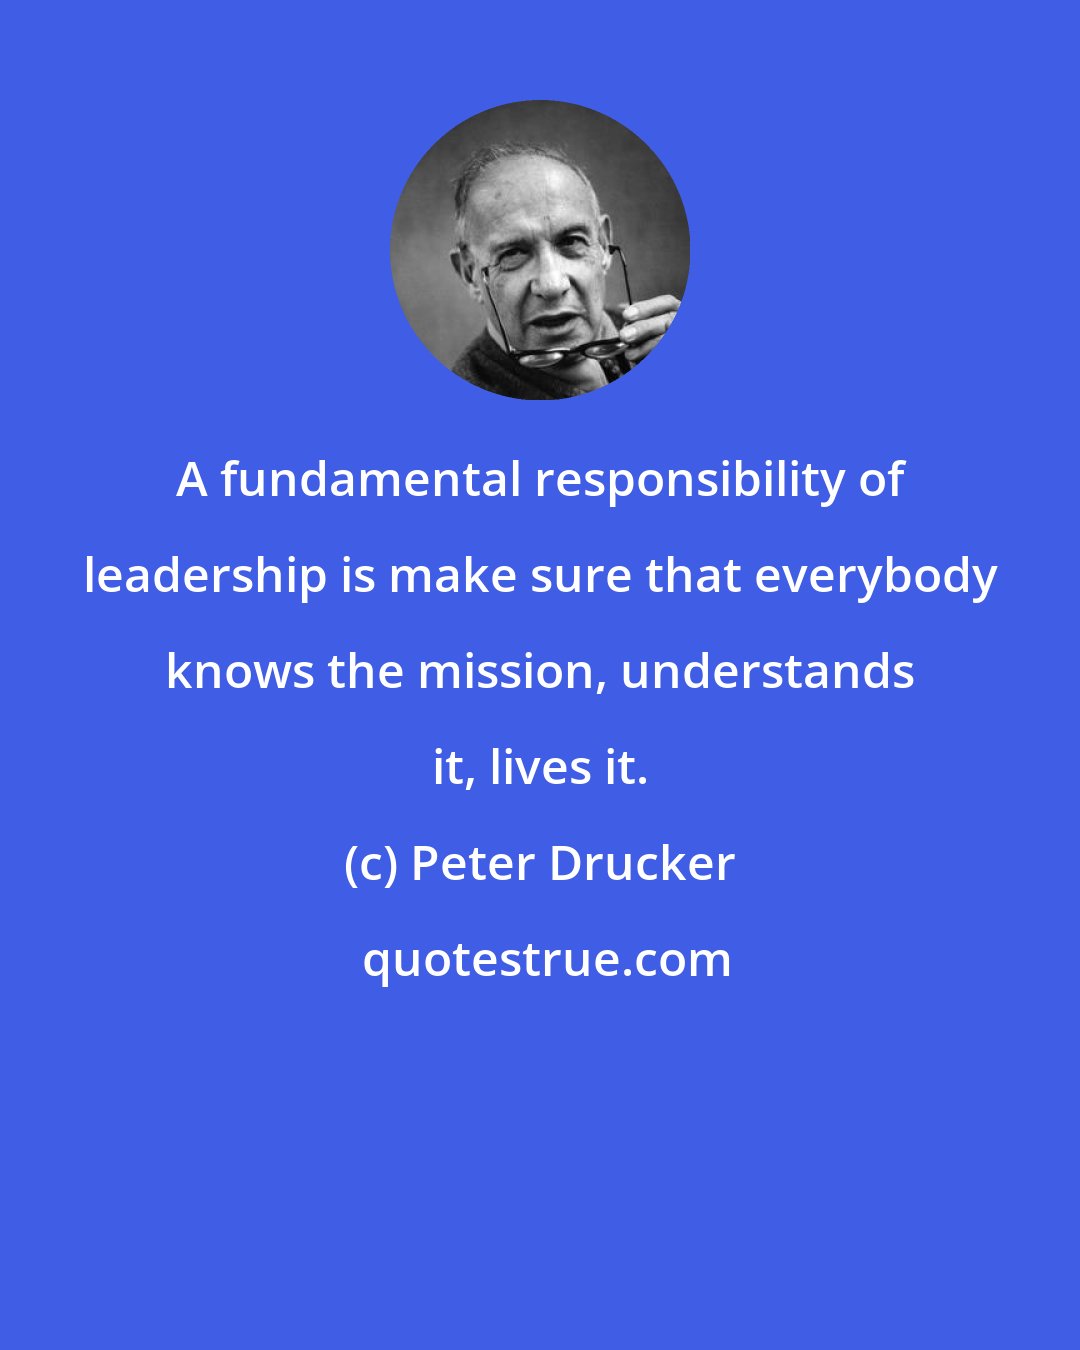 Peter Drucker: A fundamental responsibility of leadership is make sure that everybody knows the mission, understands it, lives it.